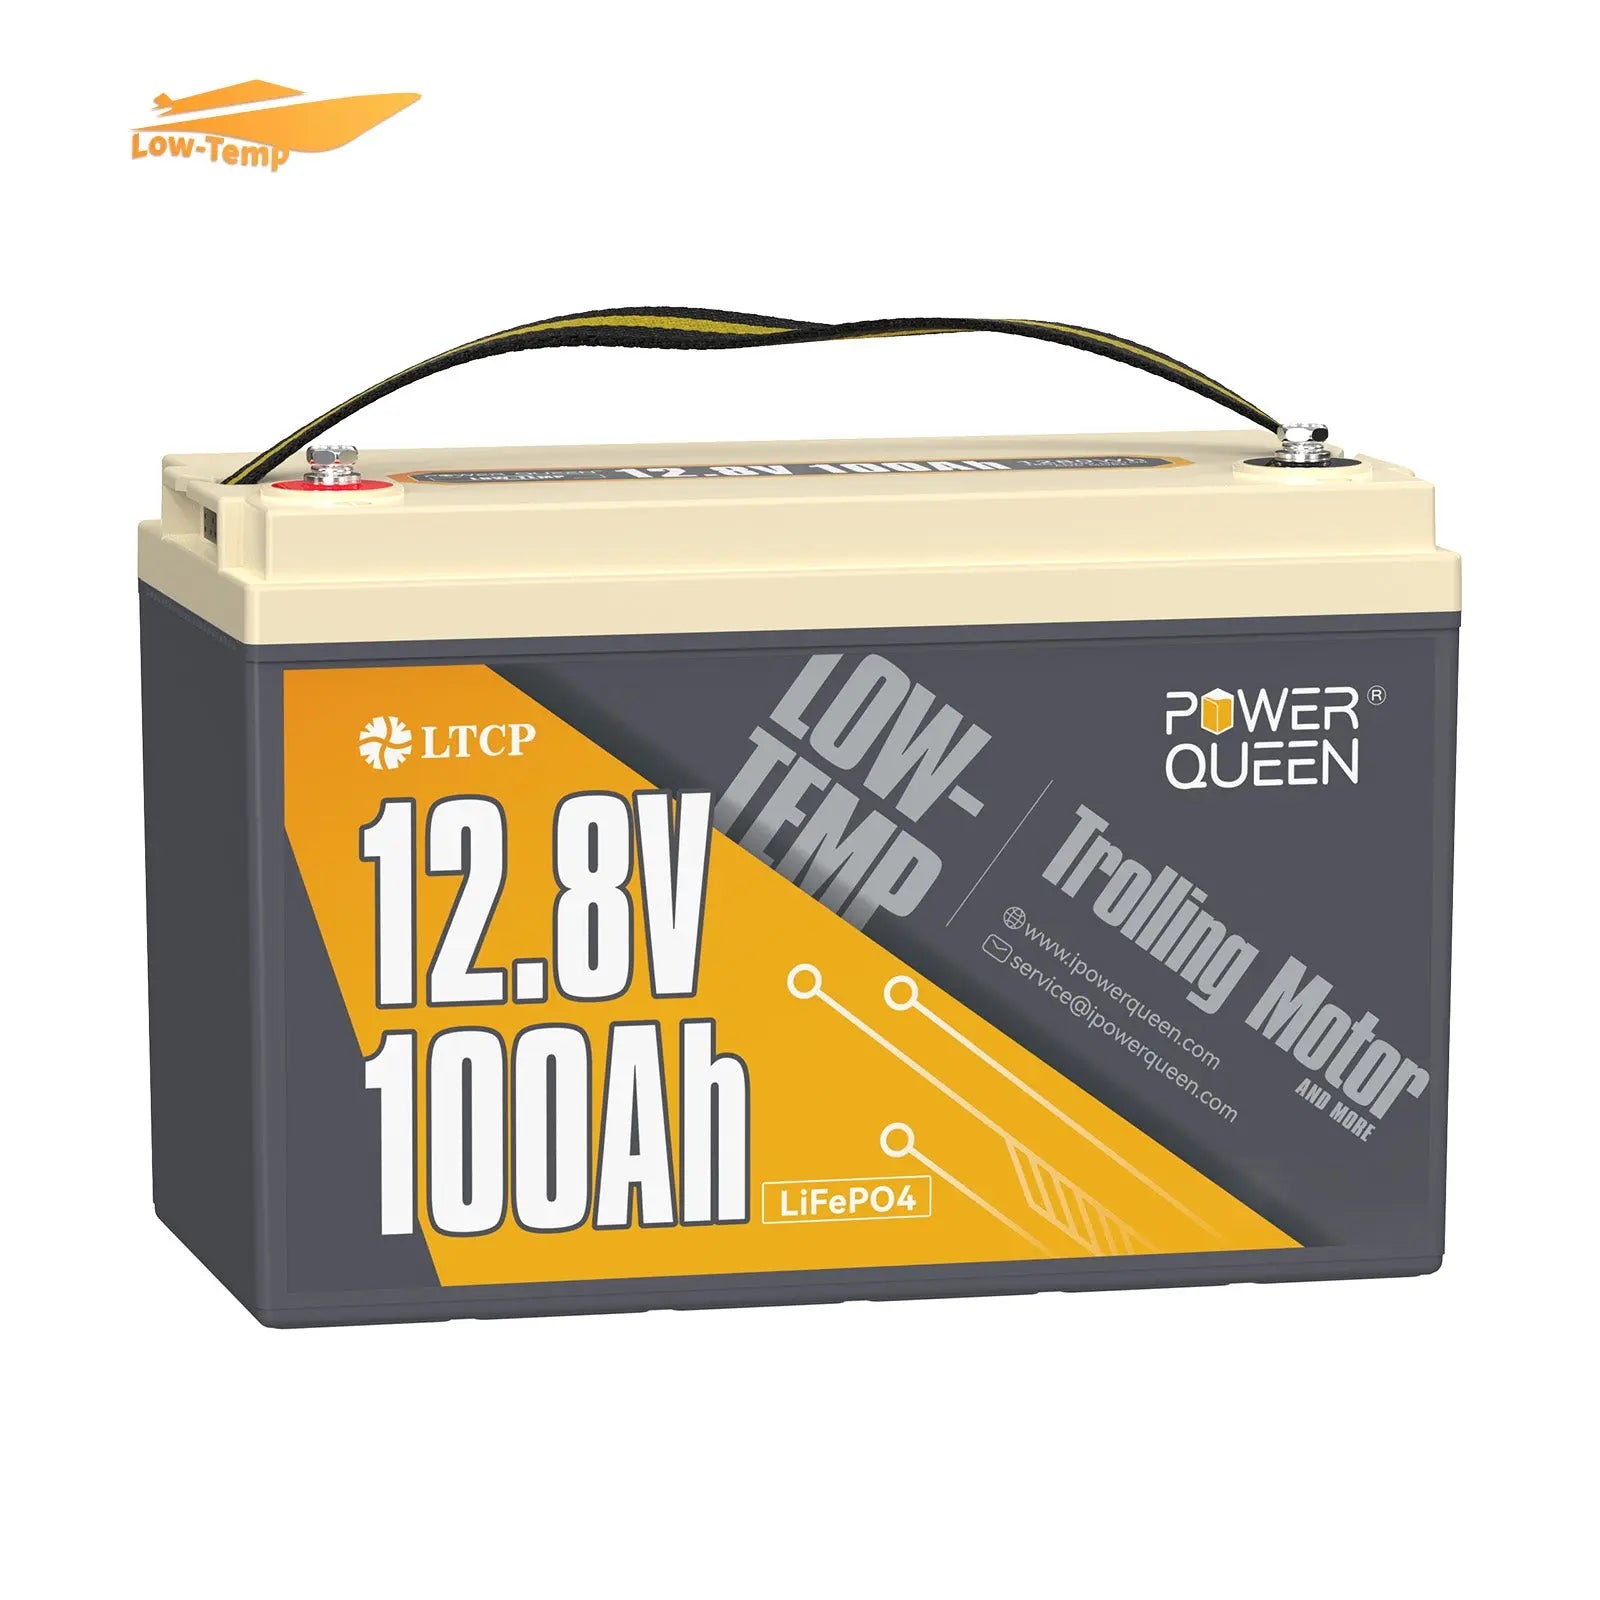 [Only $229] Power Queen 12V 100Ah Low-Temp Deep Cycle Lithium Battery Power Queen